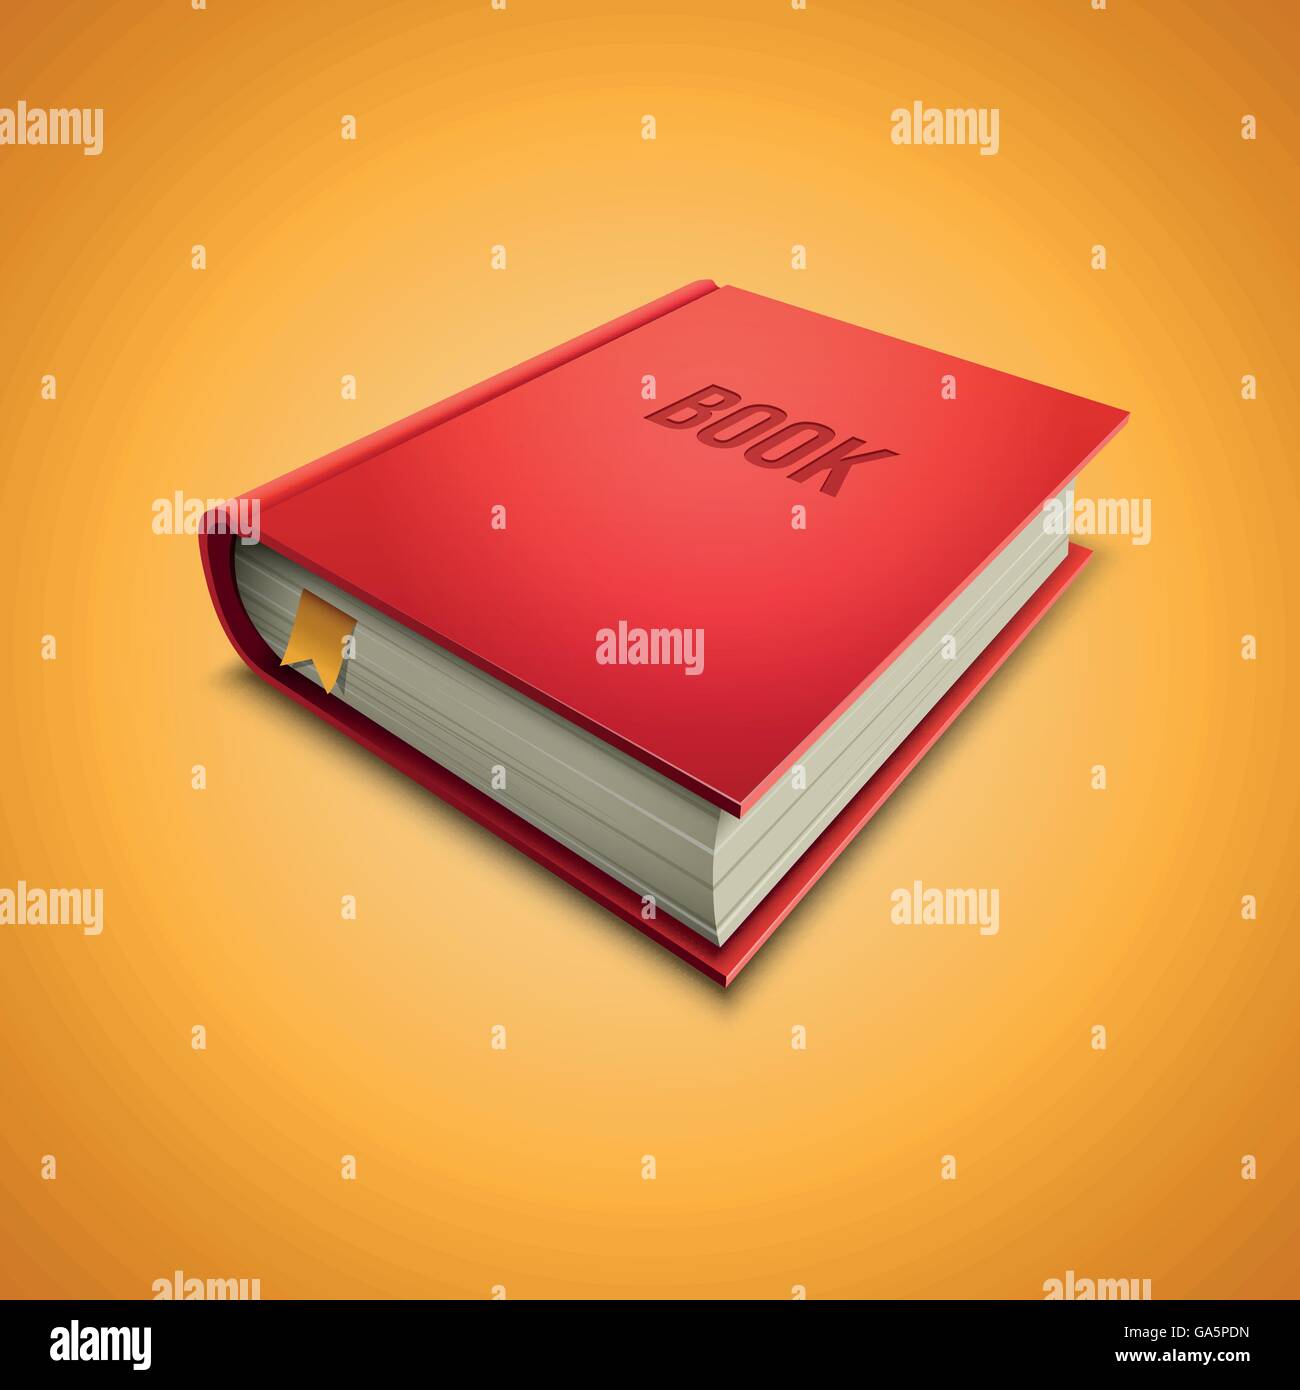 Vector illustration of red hardcover book on yellow background. Elements are layered separately in vector file. Stock Vector